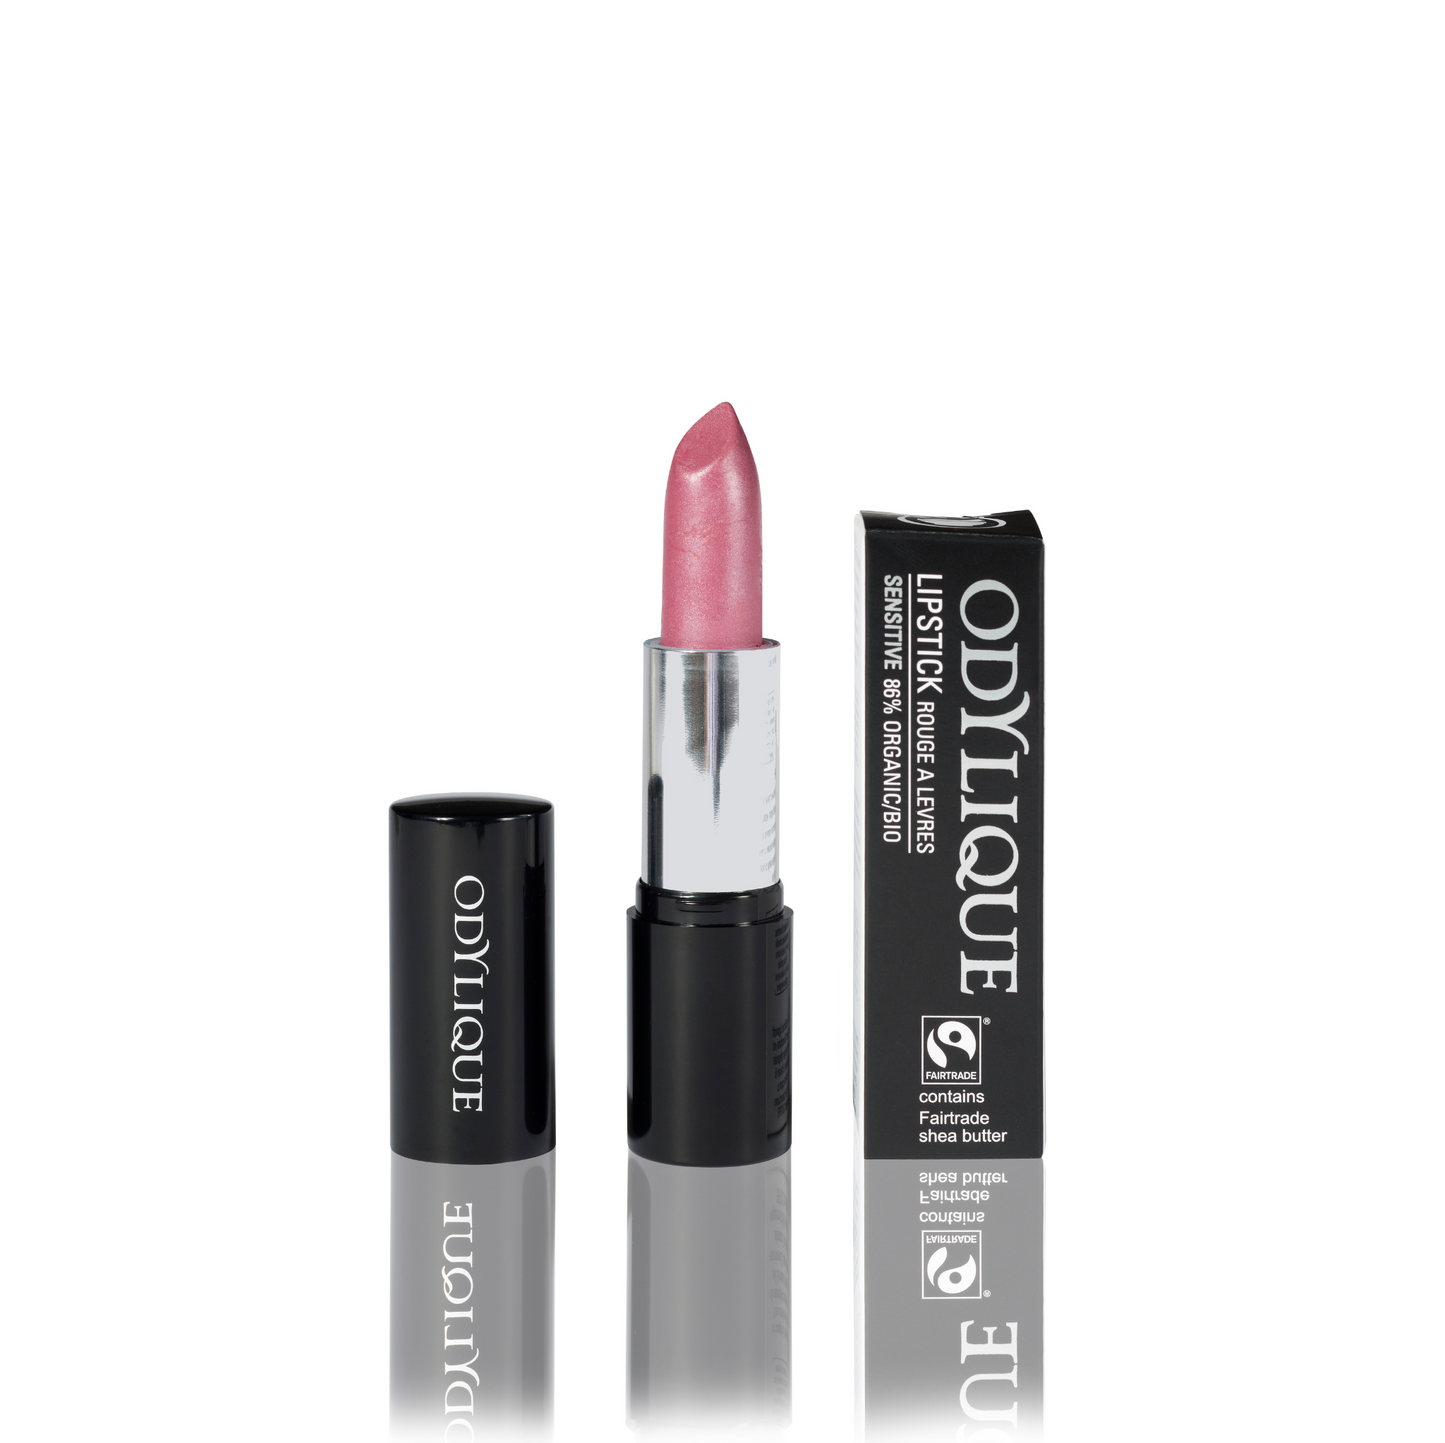 Odylique lipstick in Marshamallow (translucent frosted candy pink) partially twisted up from its black tube, positioned next to its packaging on a reflective surface.